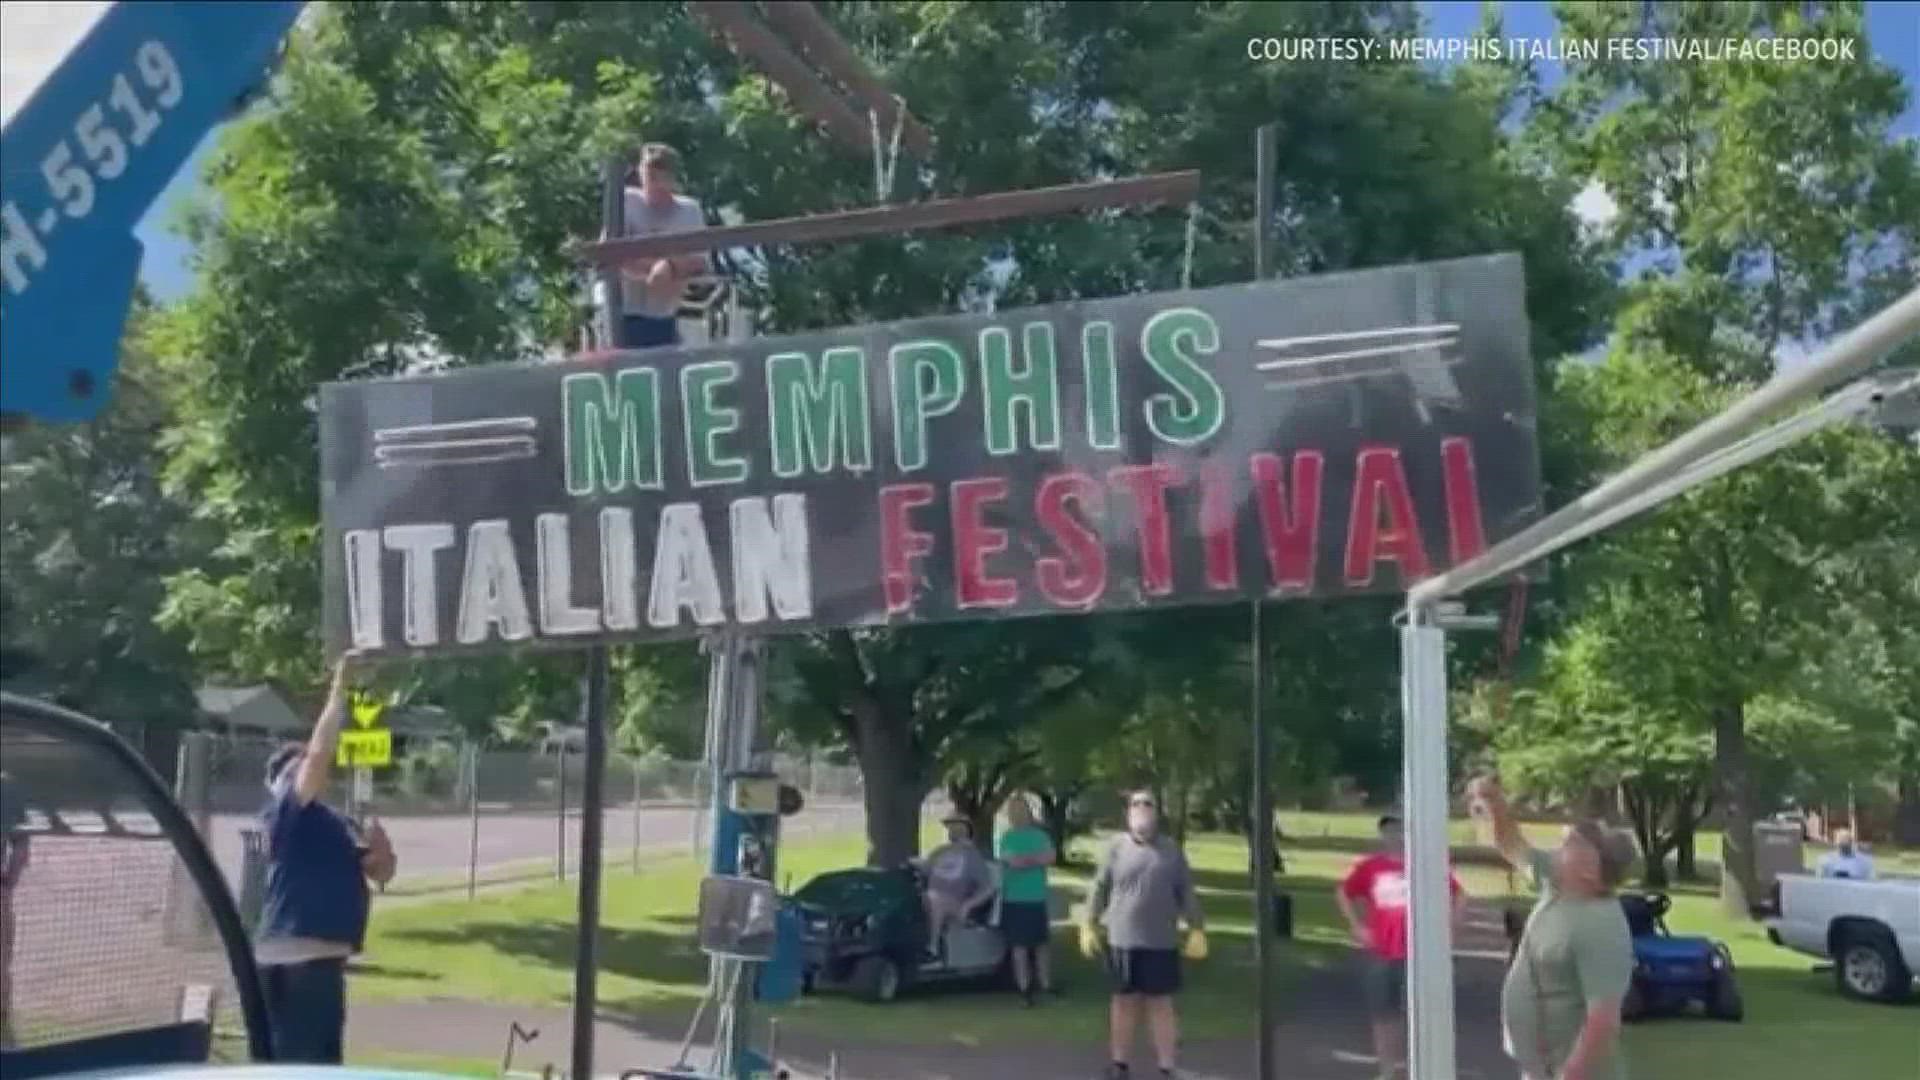 Take a look at some of the events happening in Memphis this week.